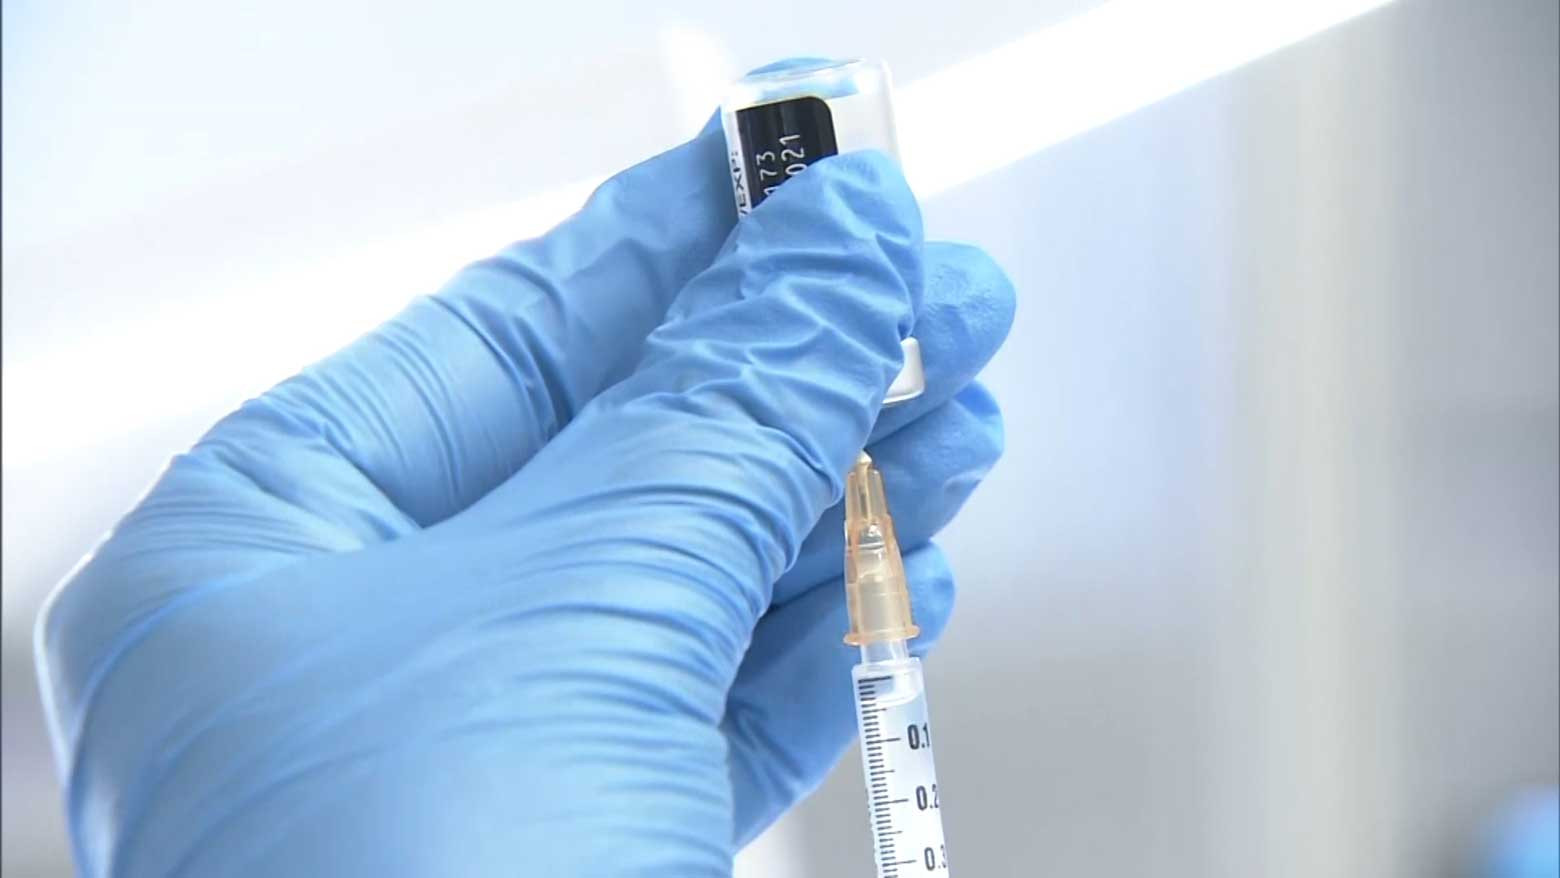 Japan aims to speed up vaccine development